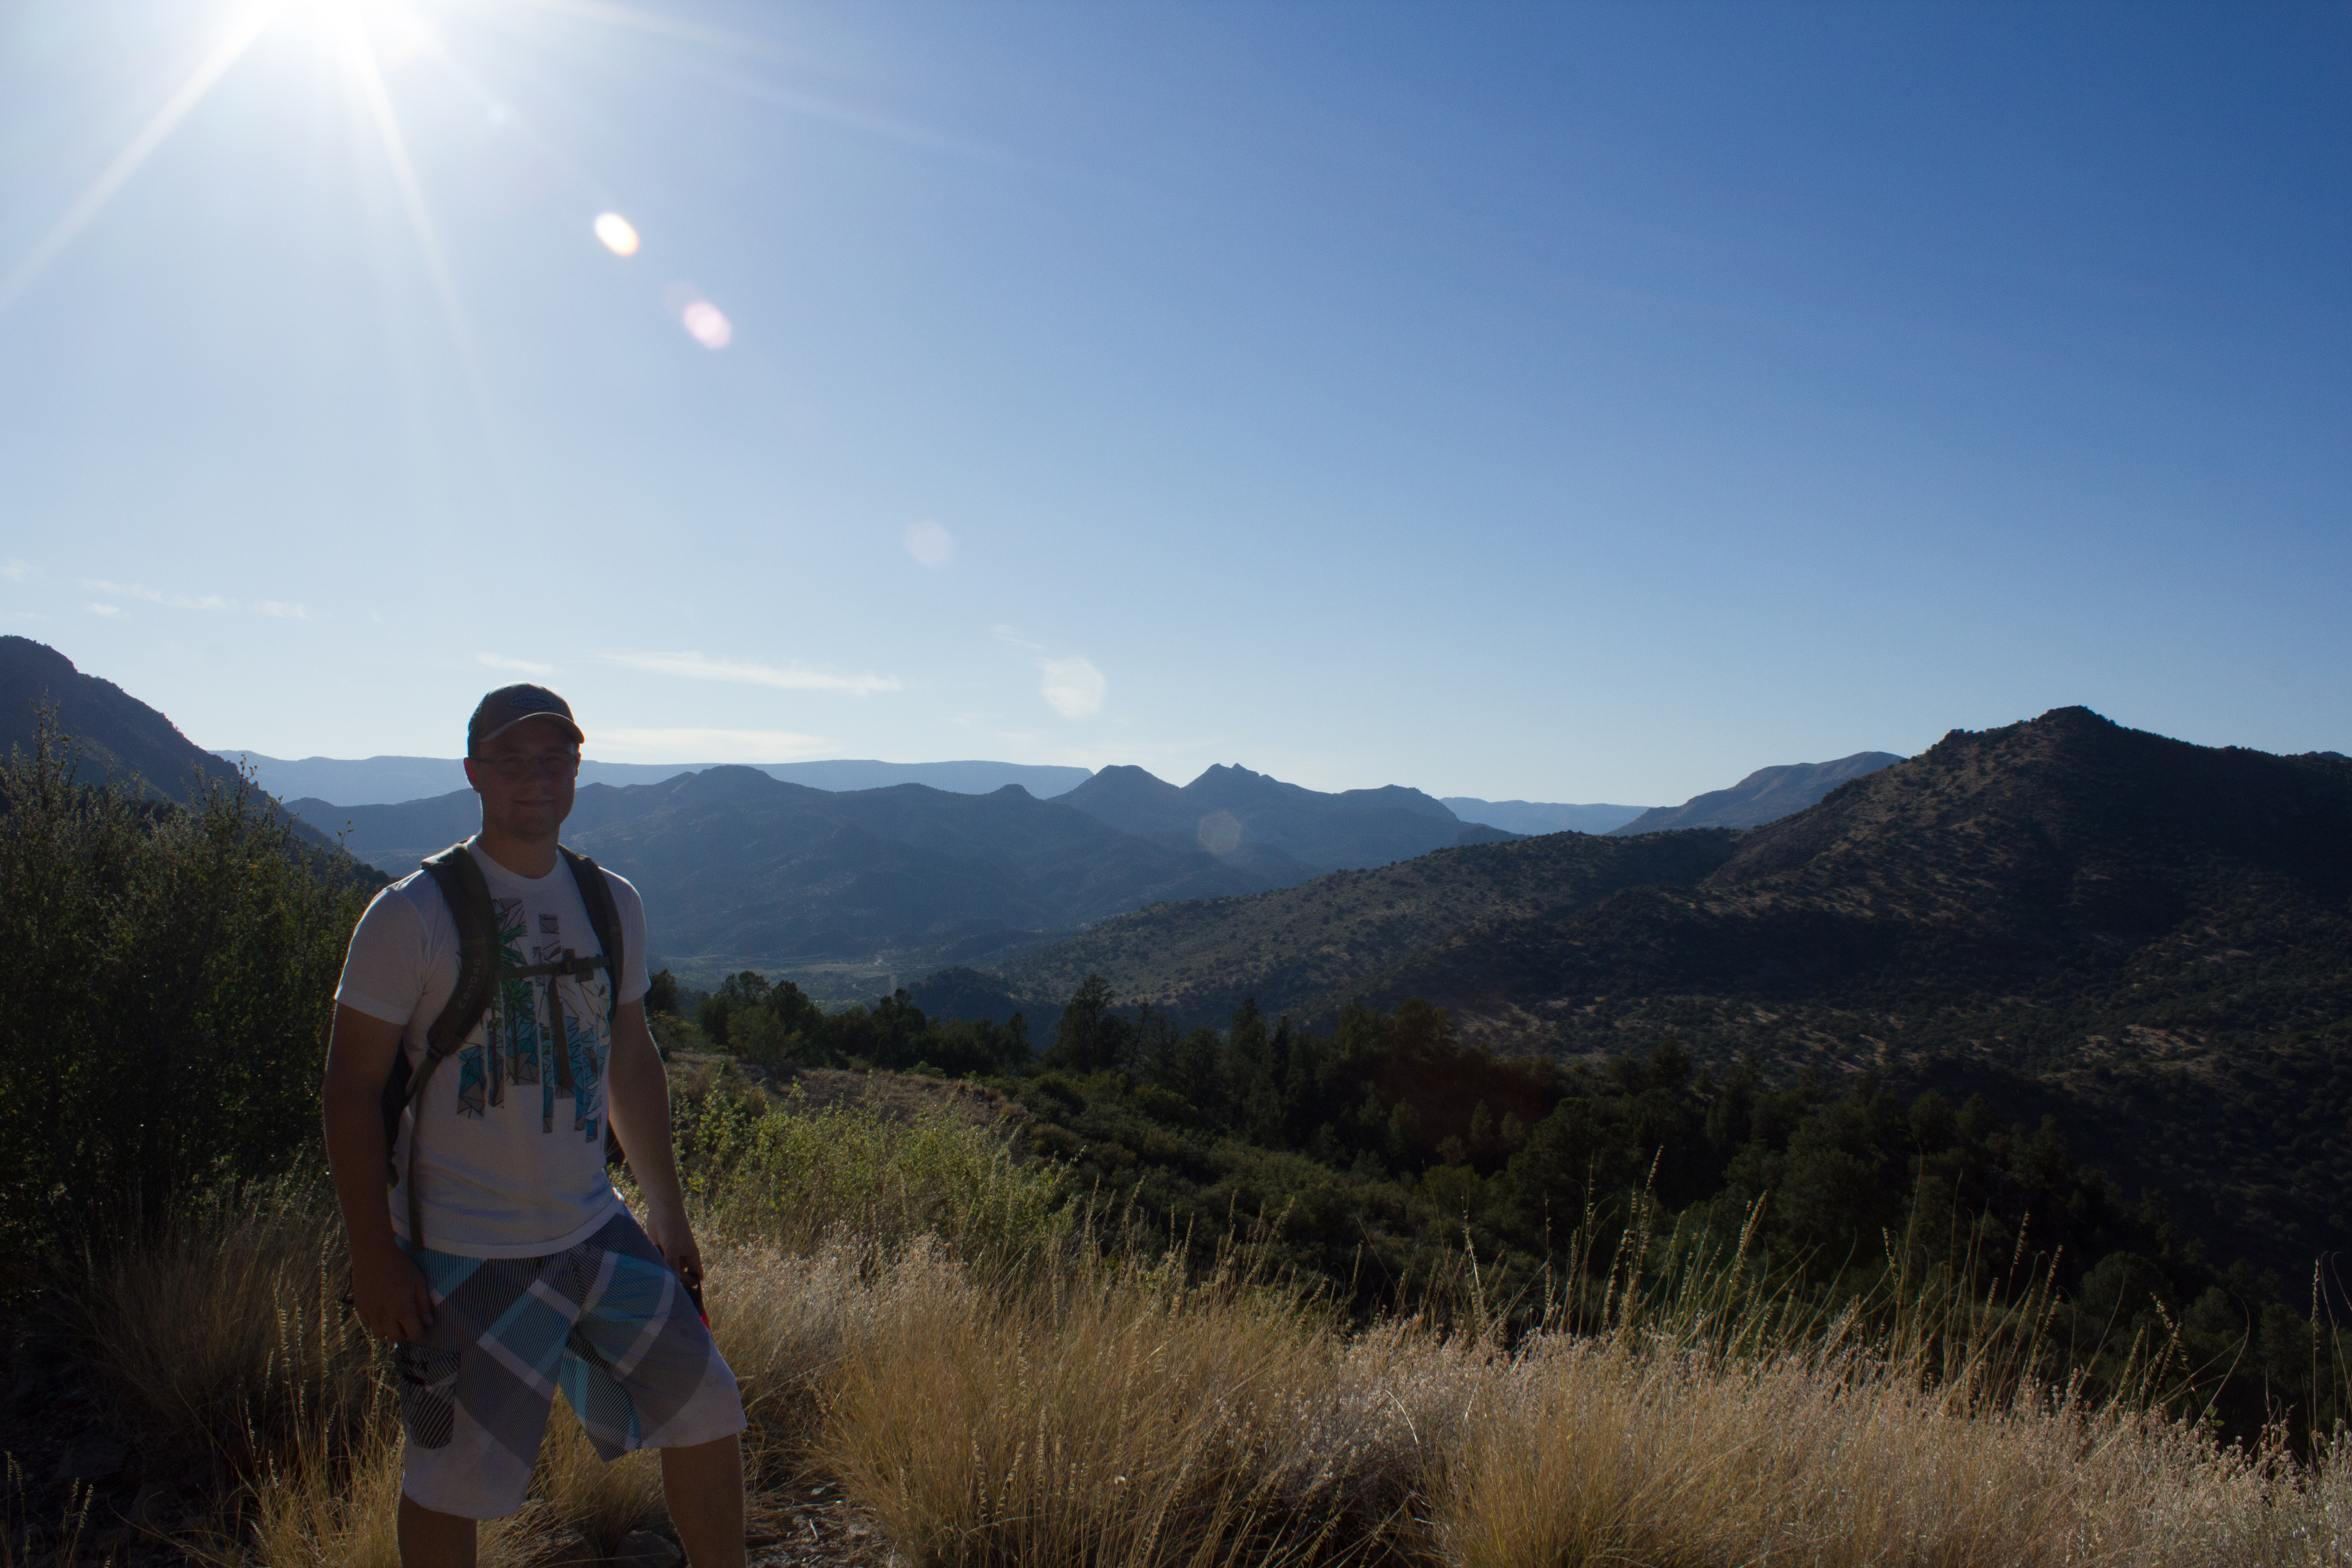 UK BMES member Dillon Huffman found some time for hiking after presenting his research on sleep modulation.